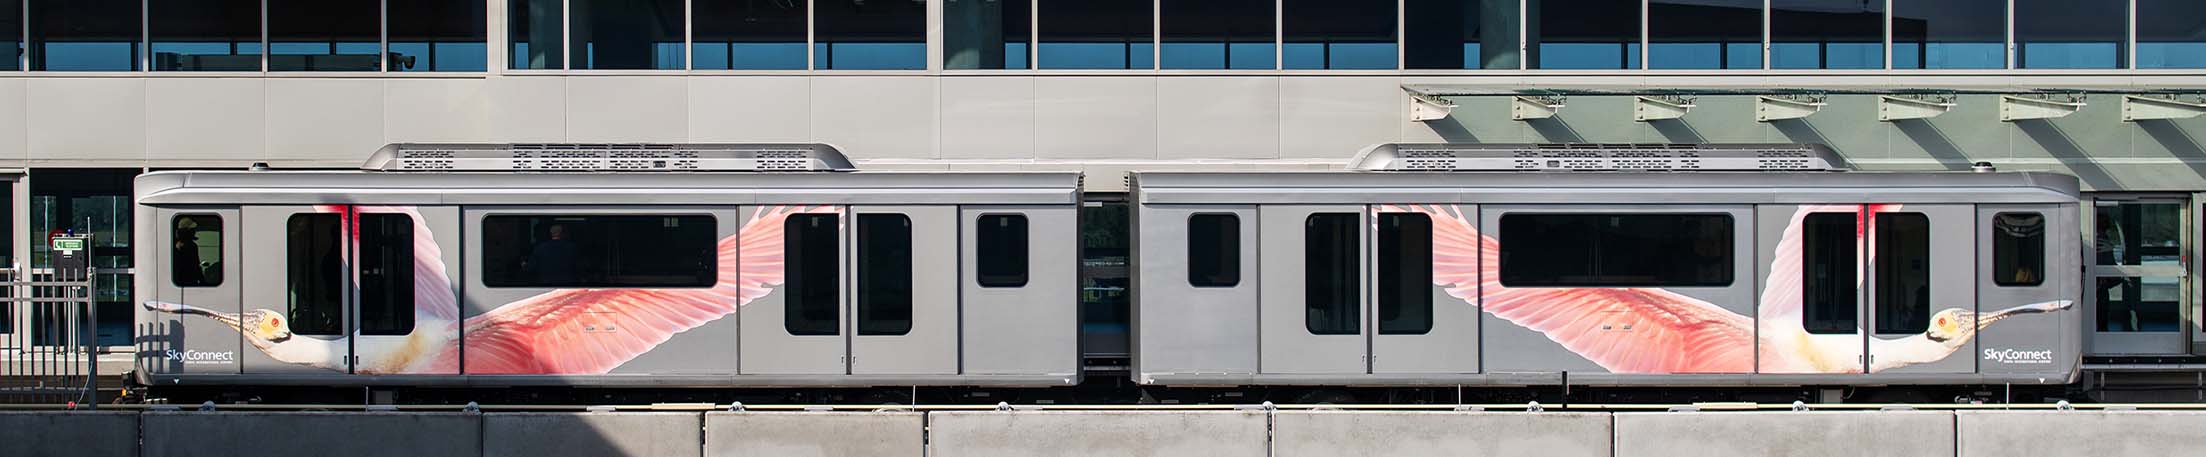 Exterior of a SkyConnect train